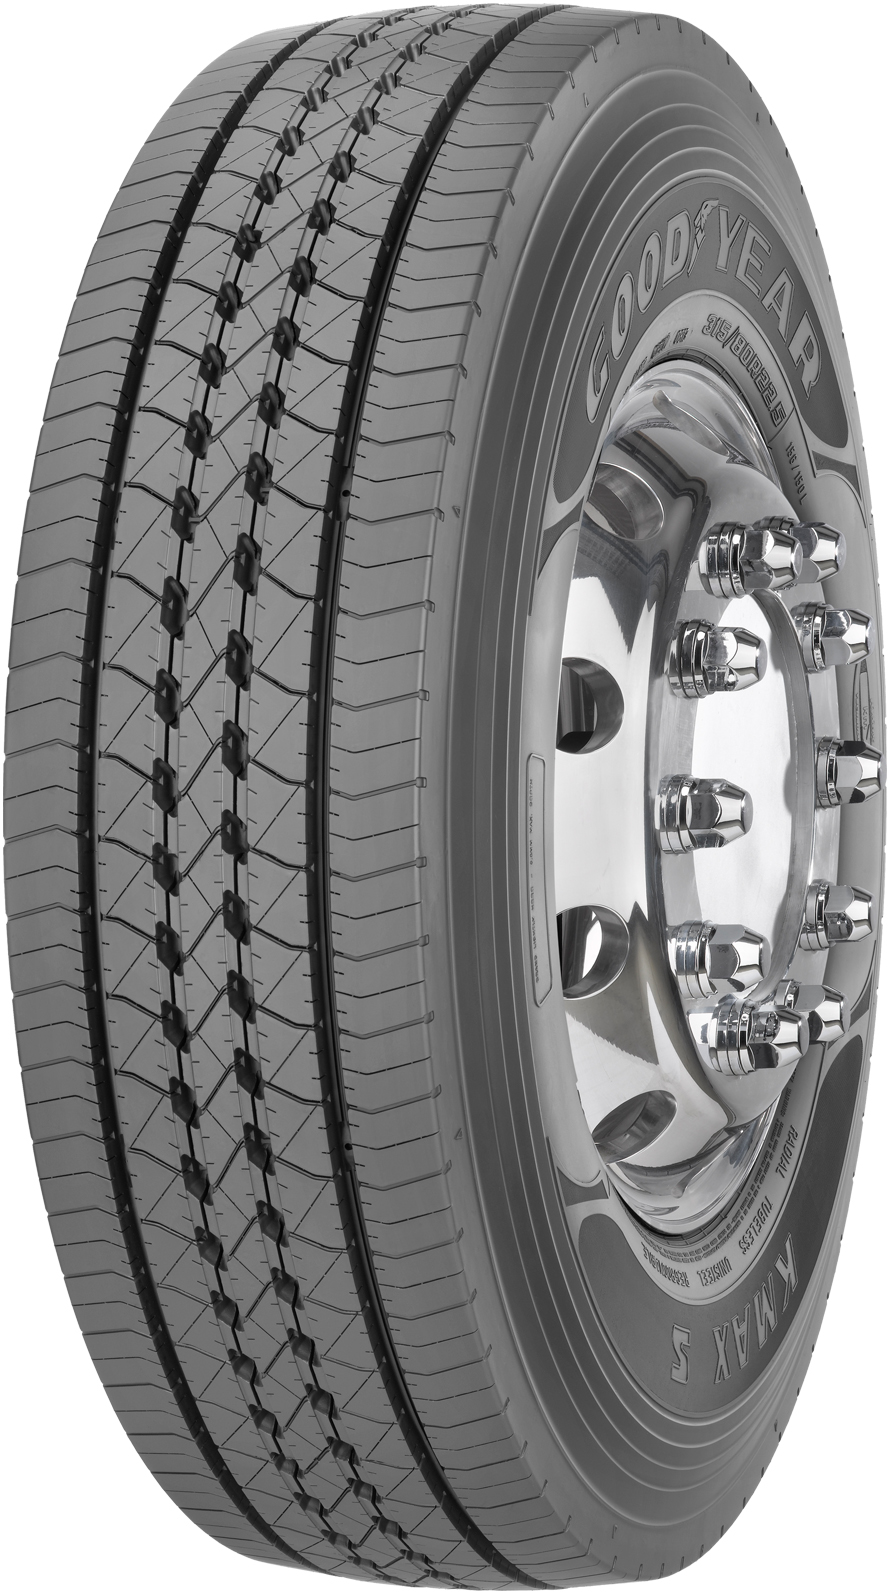 product_type-heavy_tires GOODYEAR KMAX S 14 TL 215/75 R17.5 128M